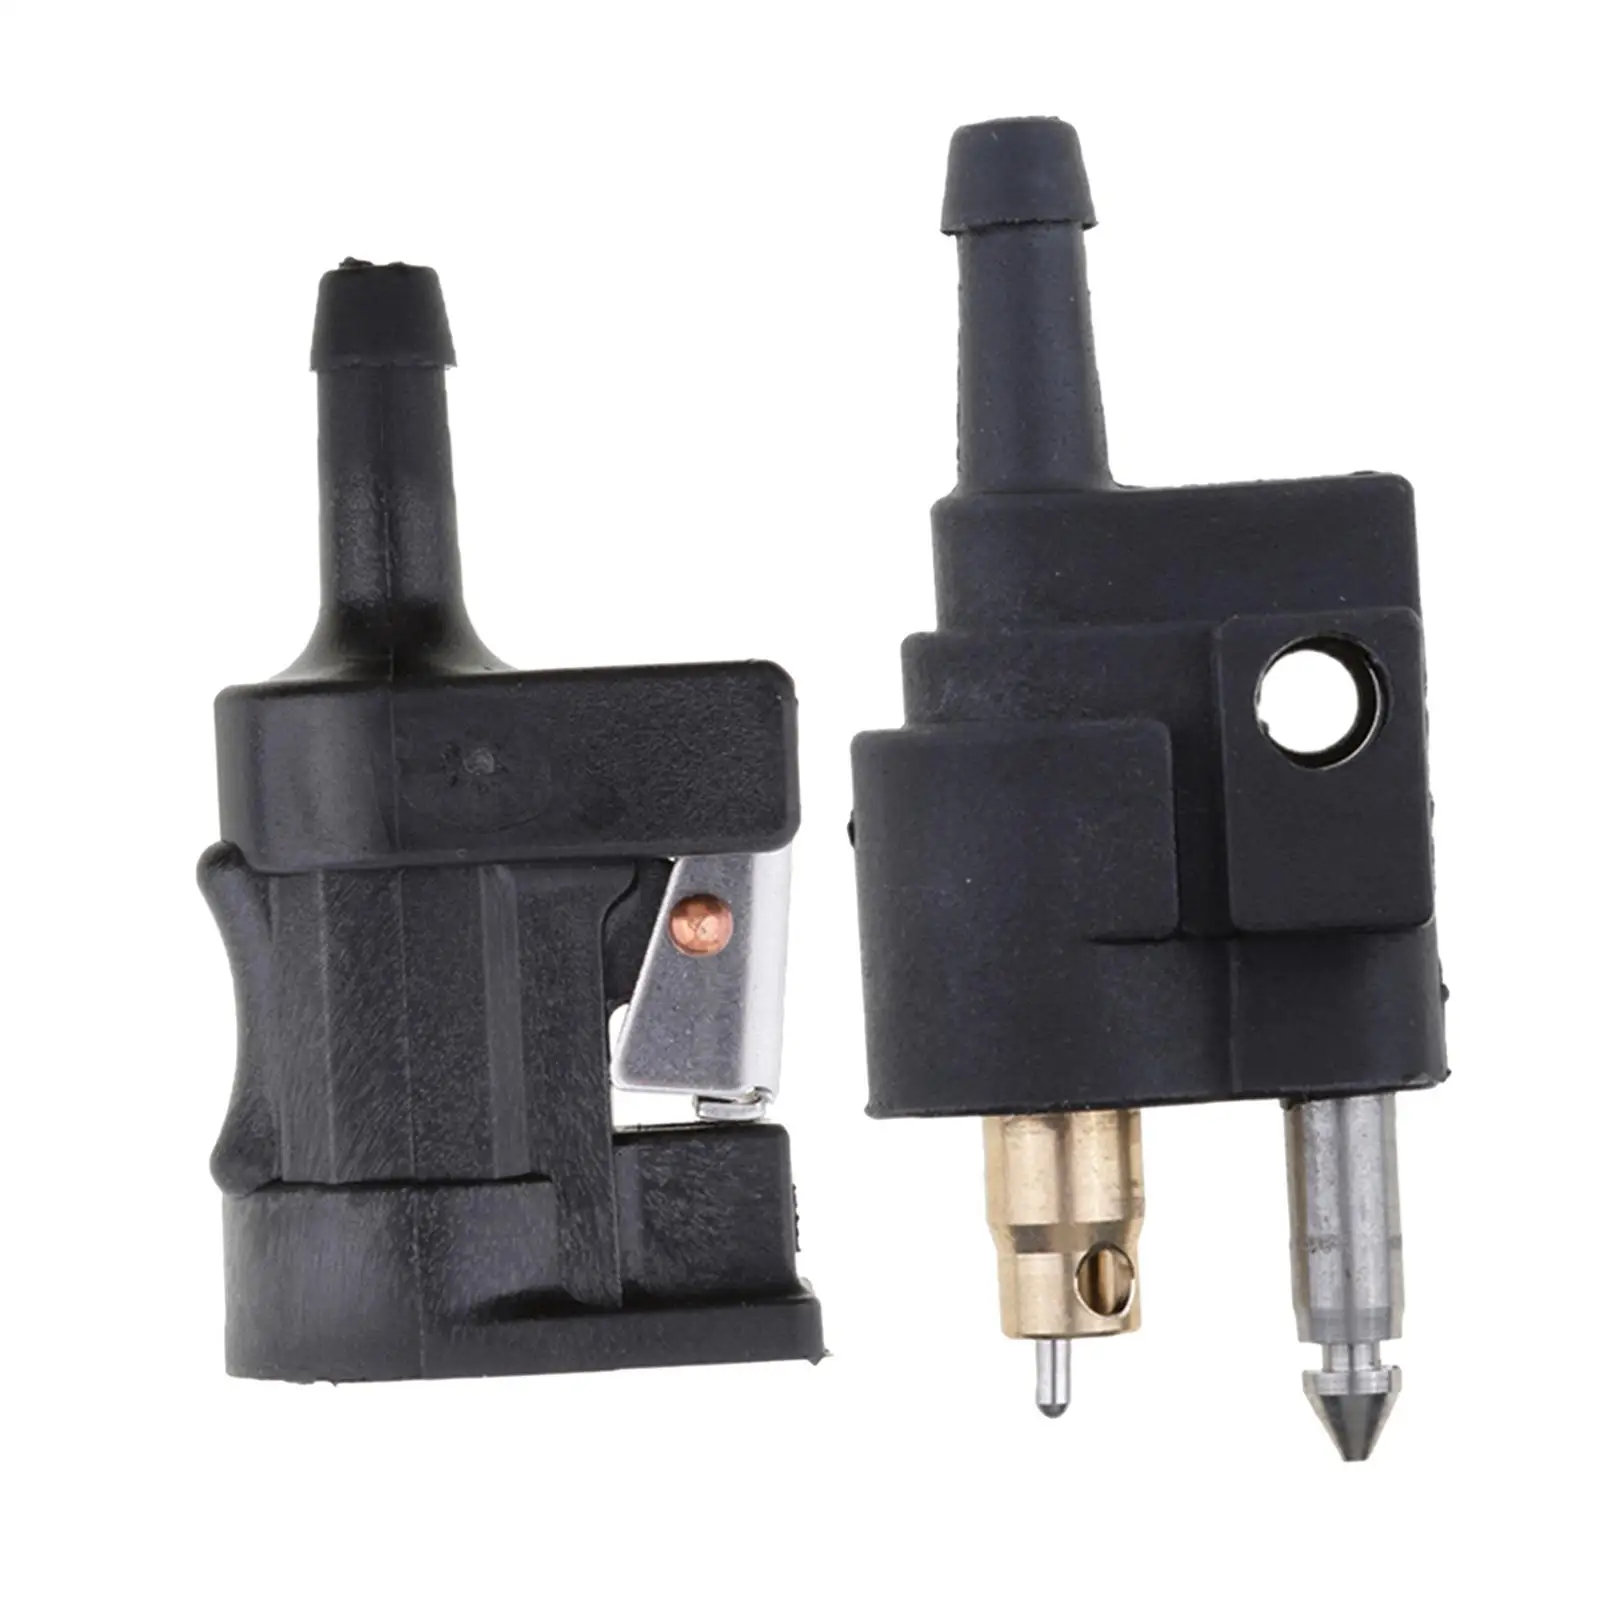 6mm Line Connector Fittings Compatible with Outboard Motor Fuel